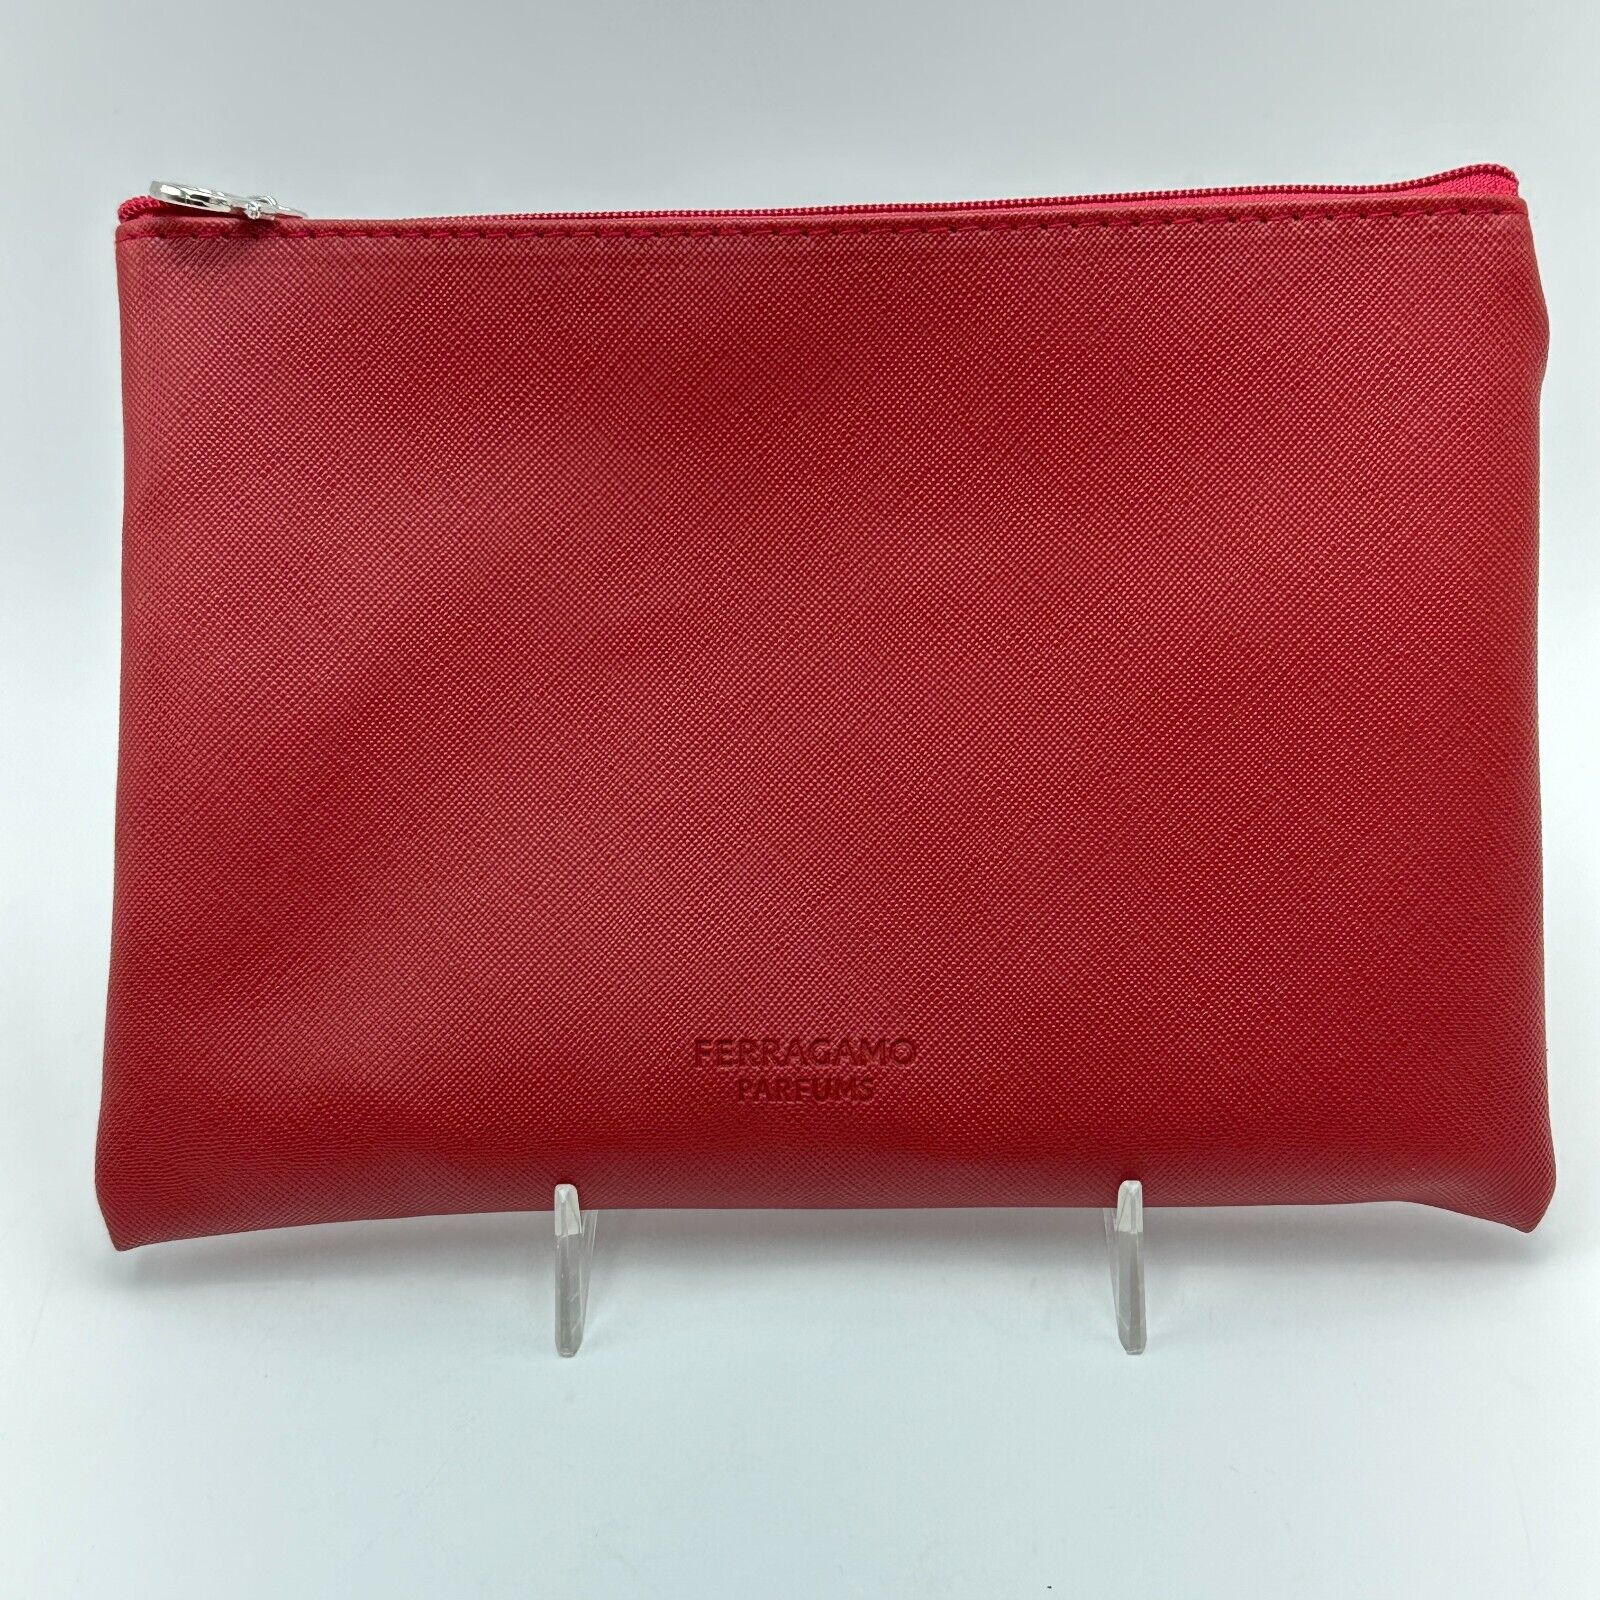 Salvatore Ferragamo Turkish Airlines Amenity Zippered Bag Red Pouch Travel 8x6